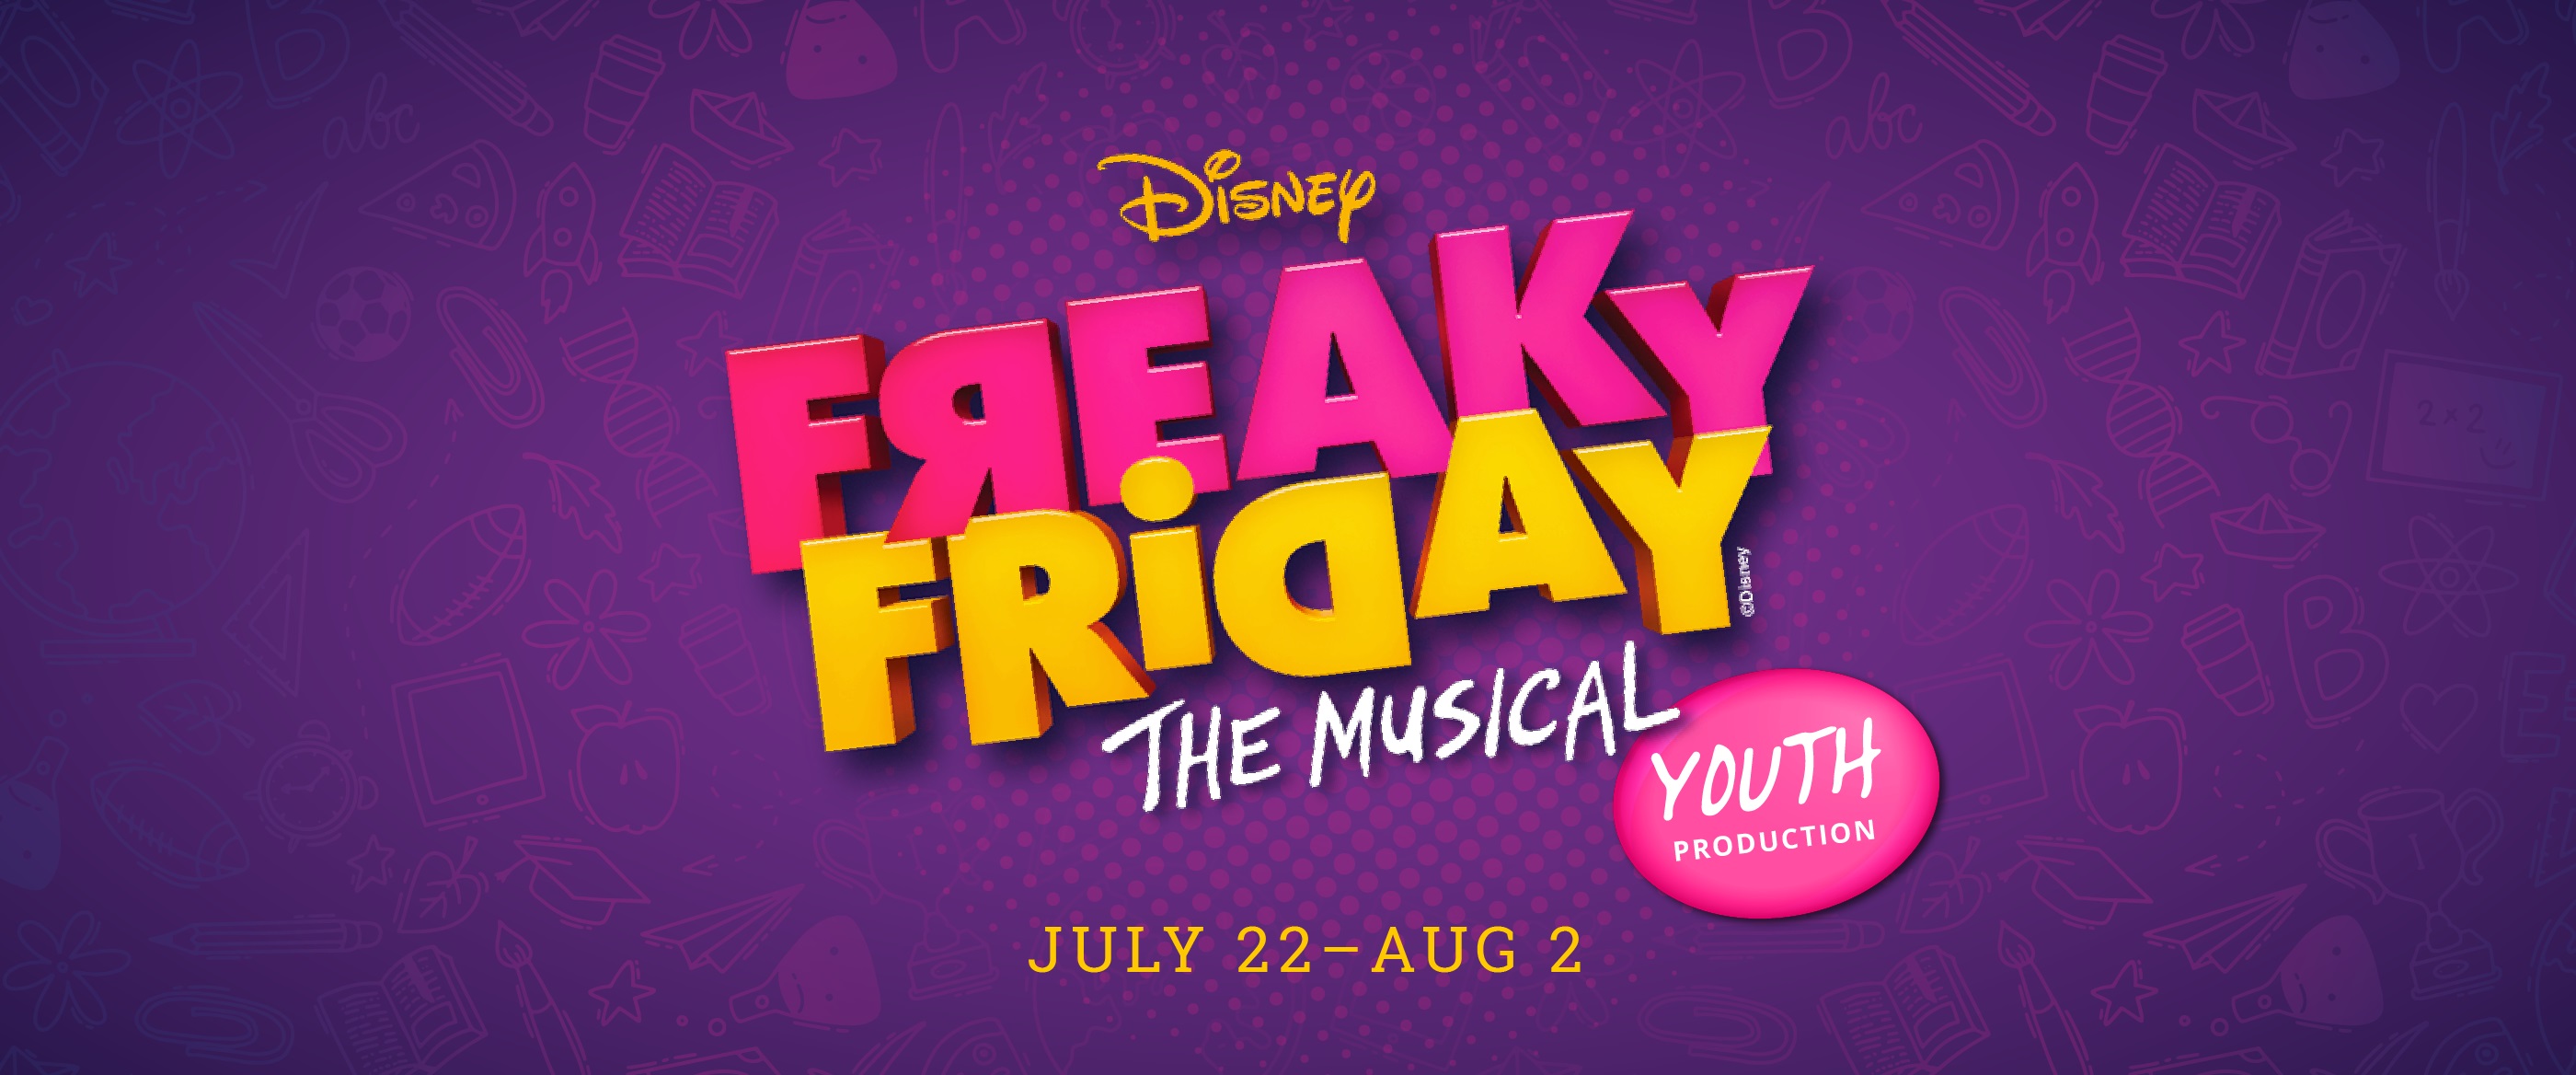 Freaky Friday Youth Production, playing July 22 - Aug 2